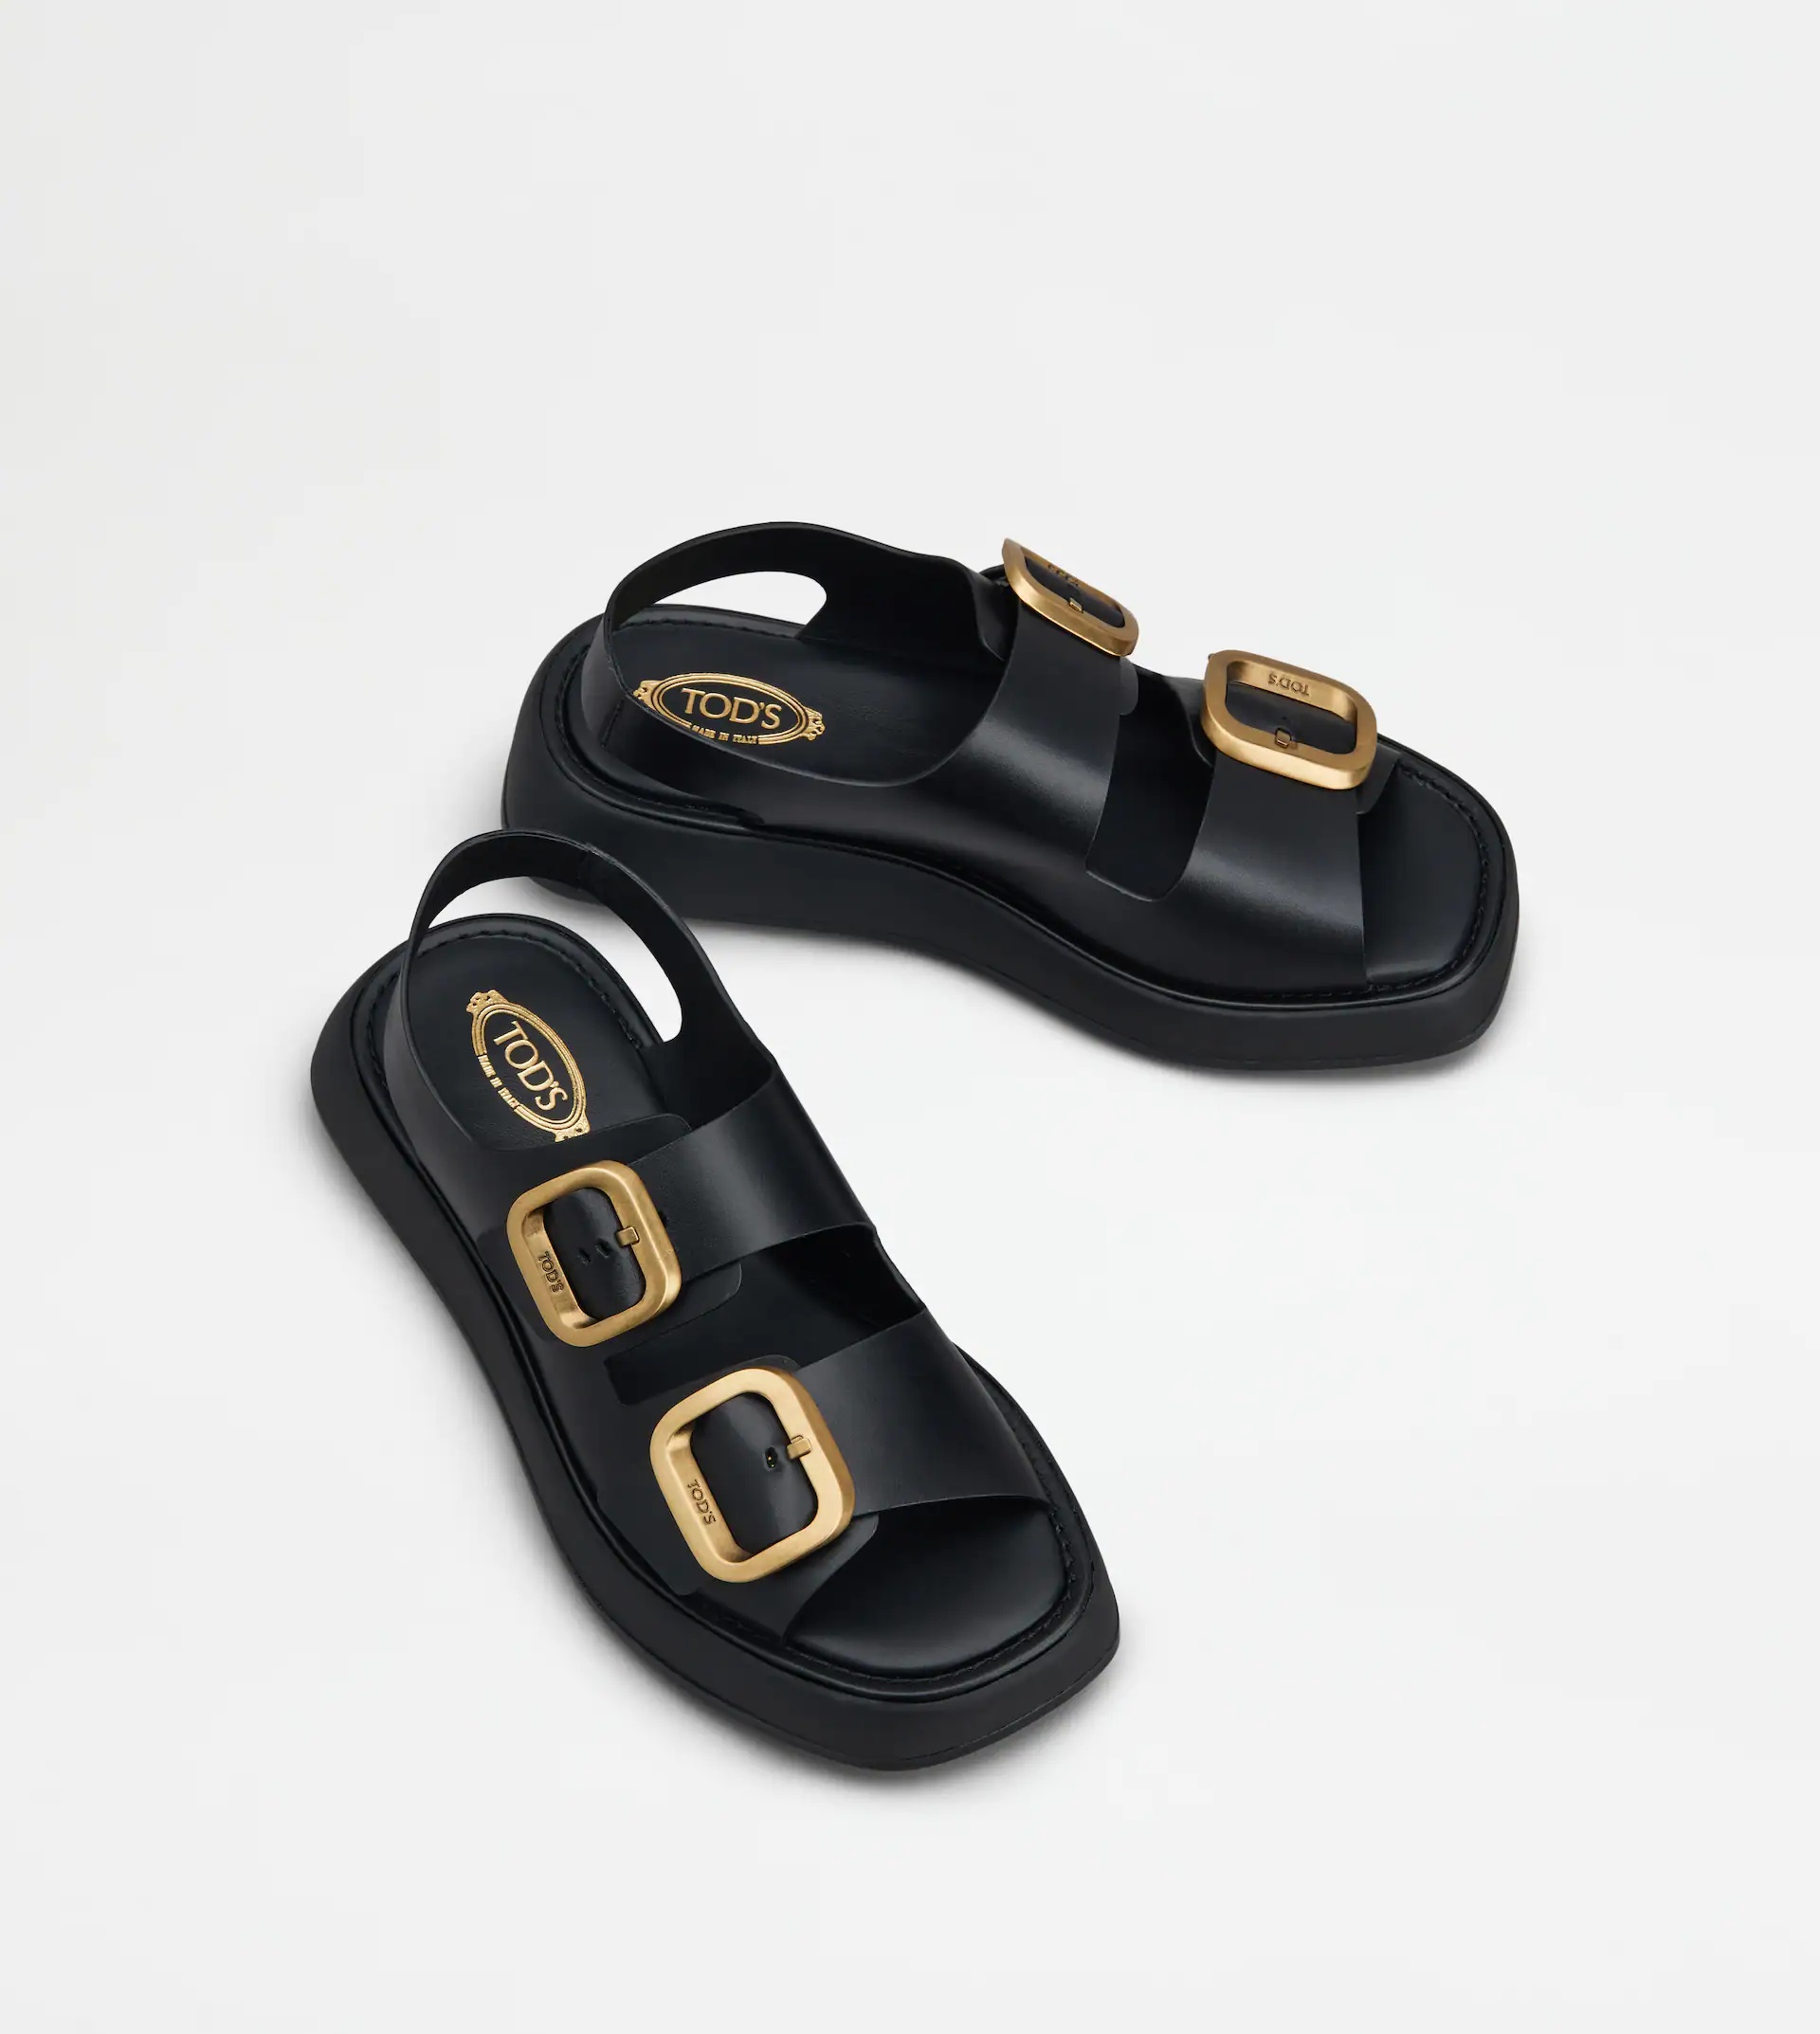 SANDALS IN LEATHER - BLACK - 3